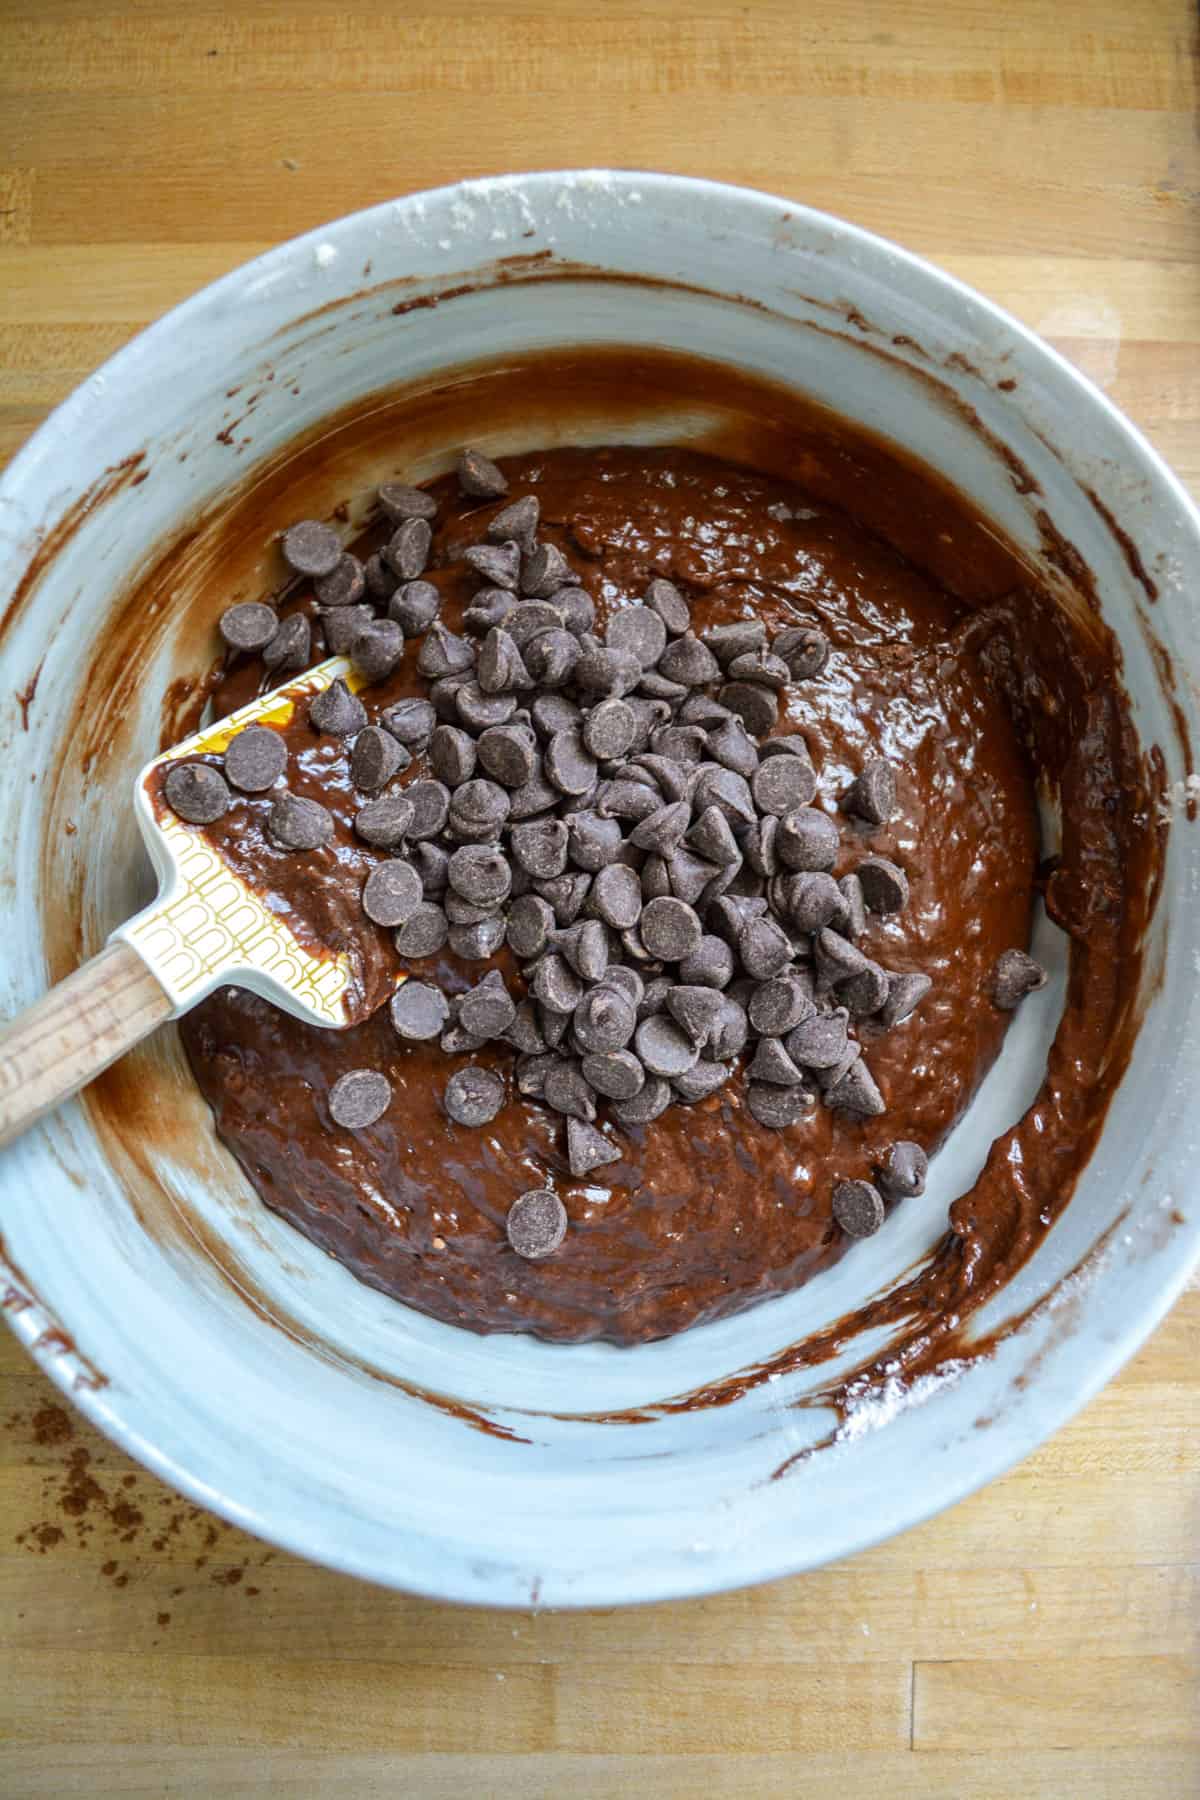 Chocolate chips added into the vegan banana brownie batter in the mixing bowl with a spatula off to the left.